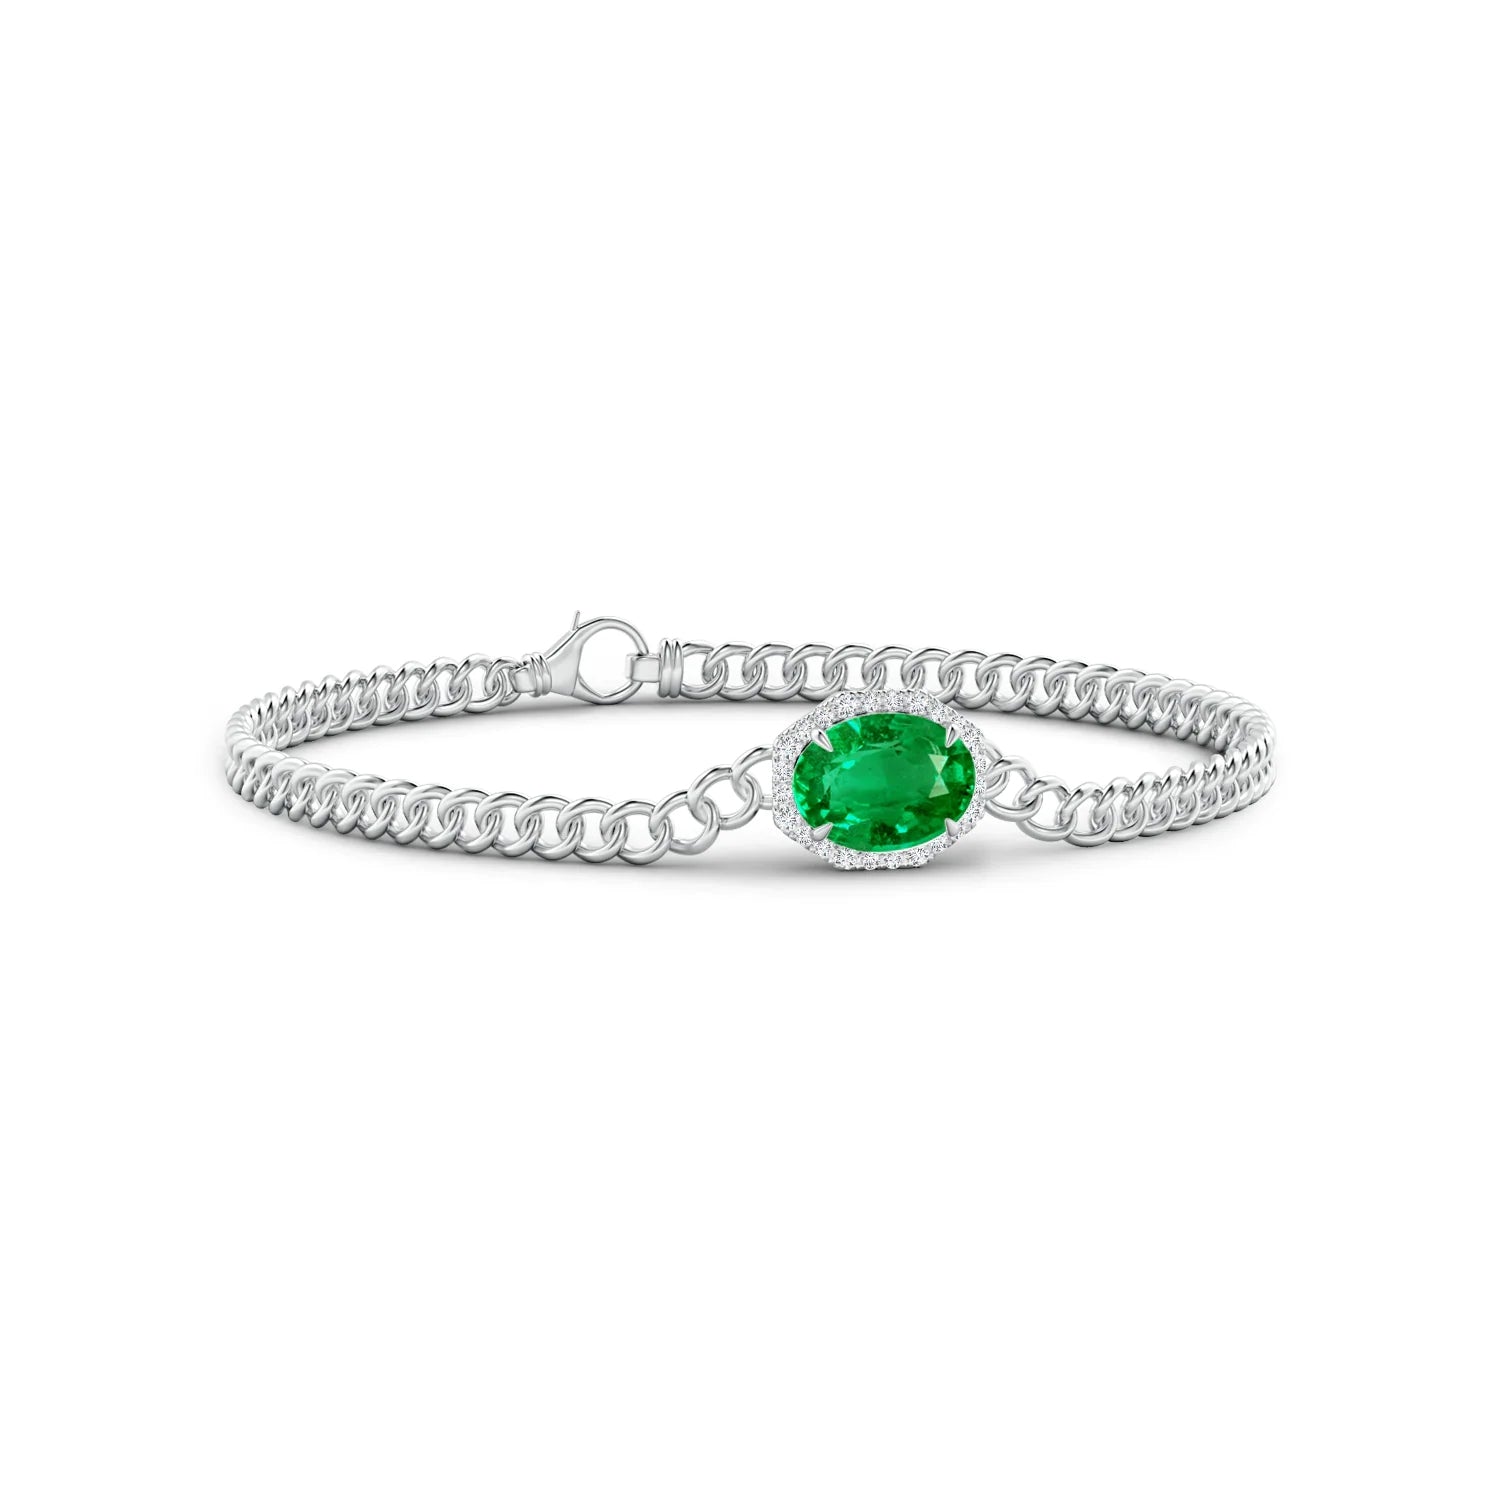 2.14 CT. Halo Oval Emerald Bracelet with Octagonal